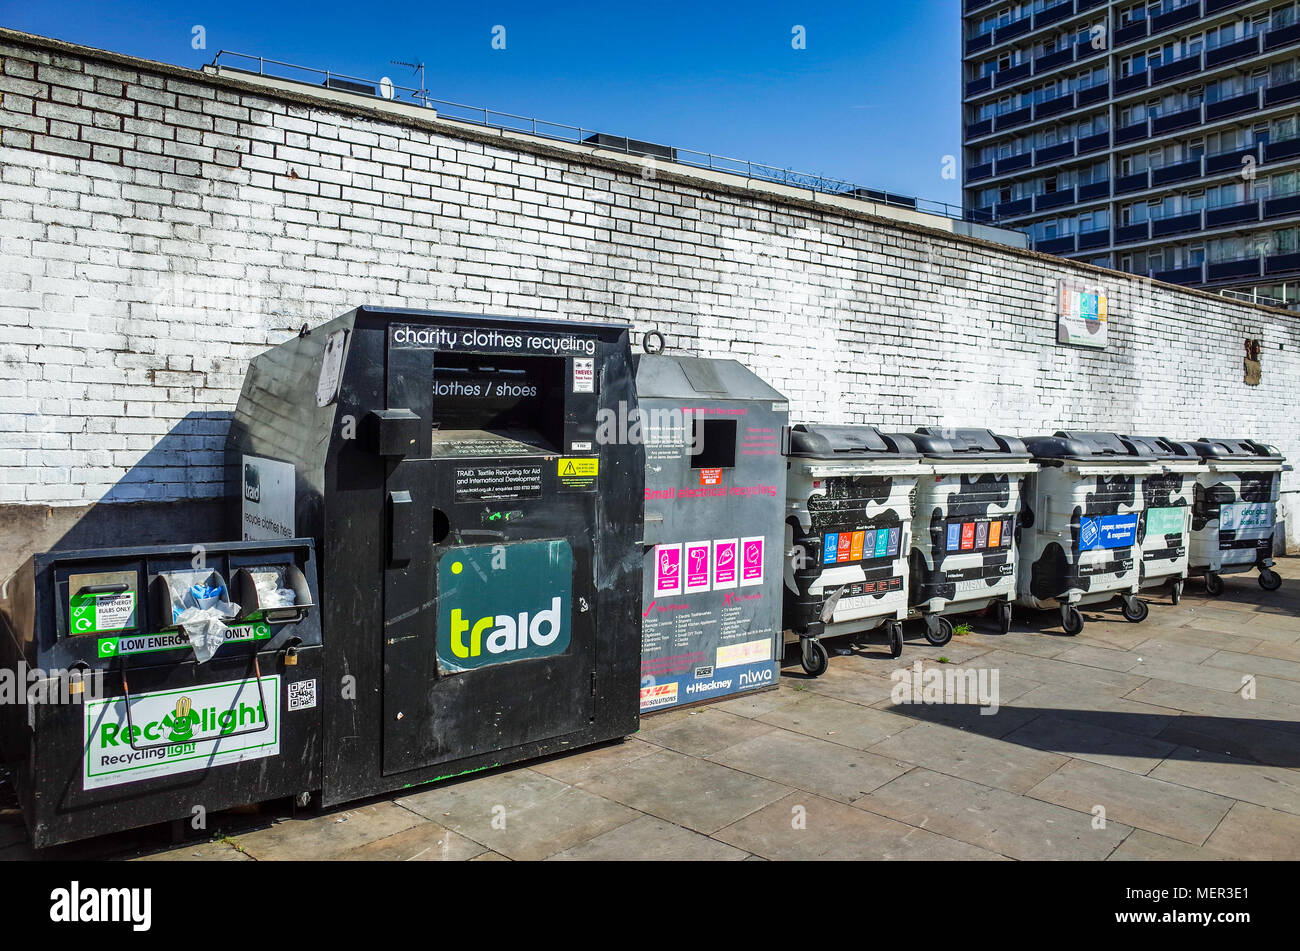 Recycling Bins in Shoreditch, near Old Street Roundabout Stock Photo